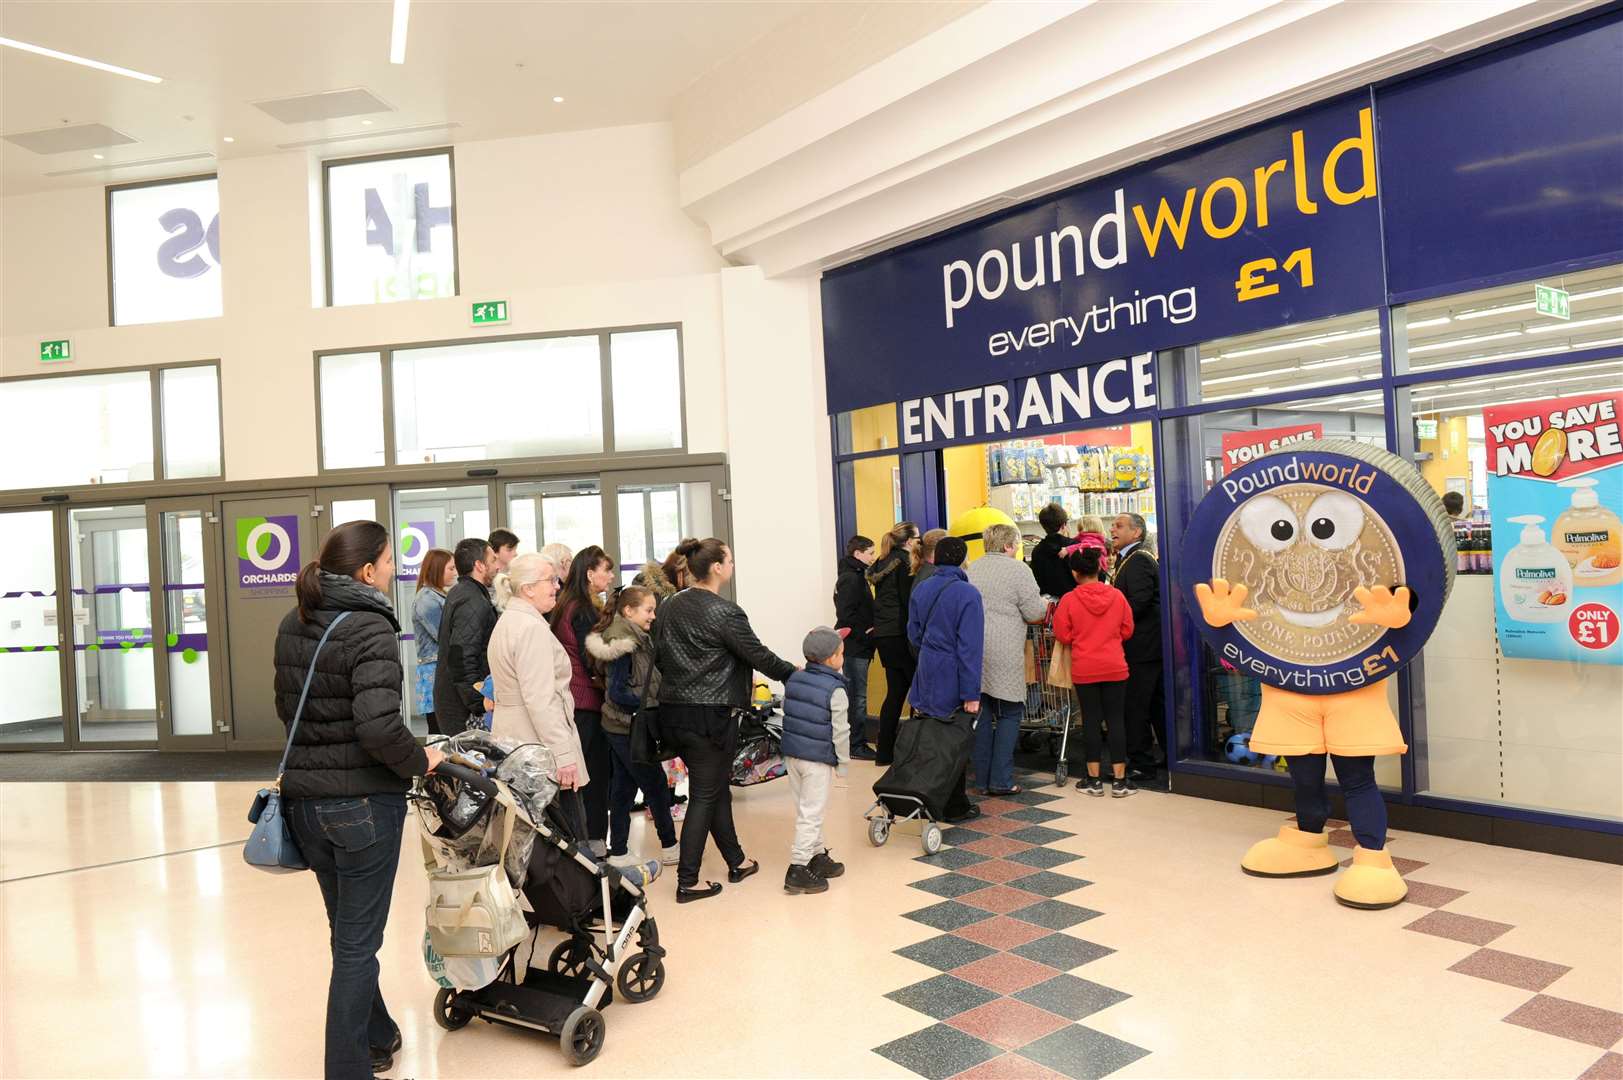 Dartford store will be one of those branches closing as Poundworld confirms all shops will close by August 10